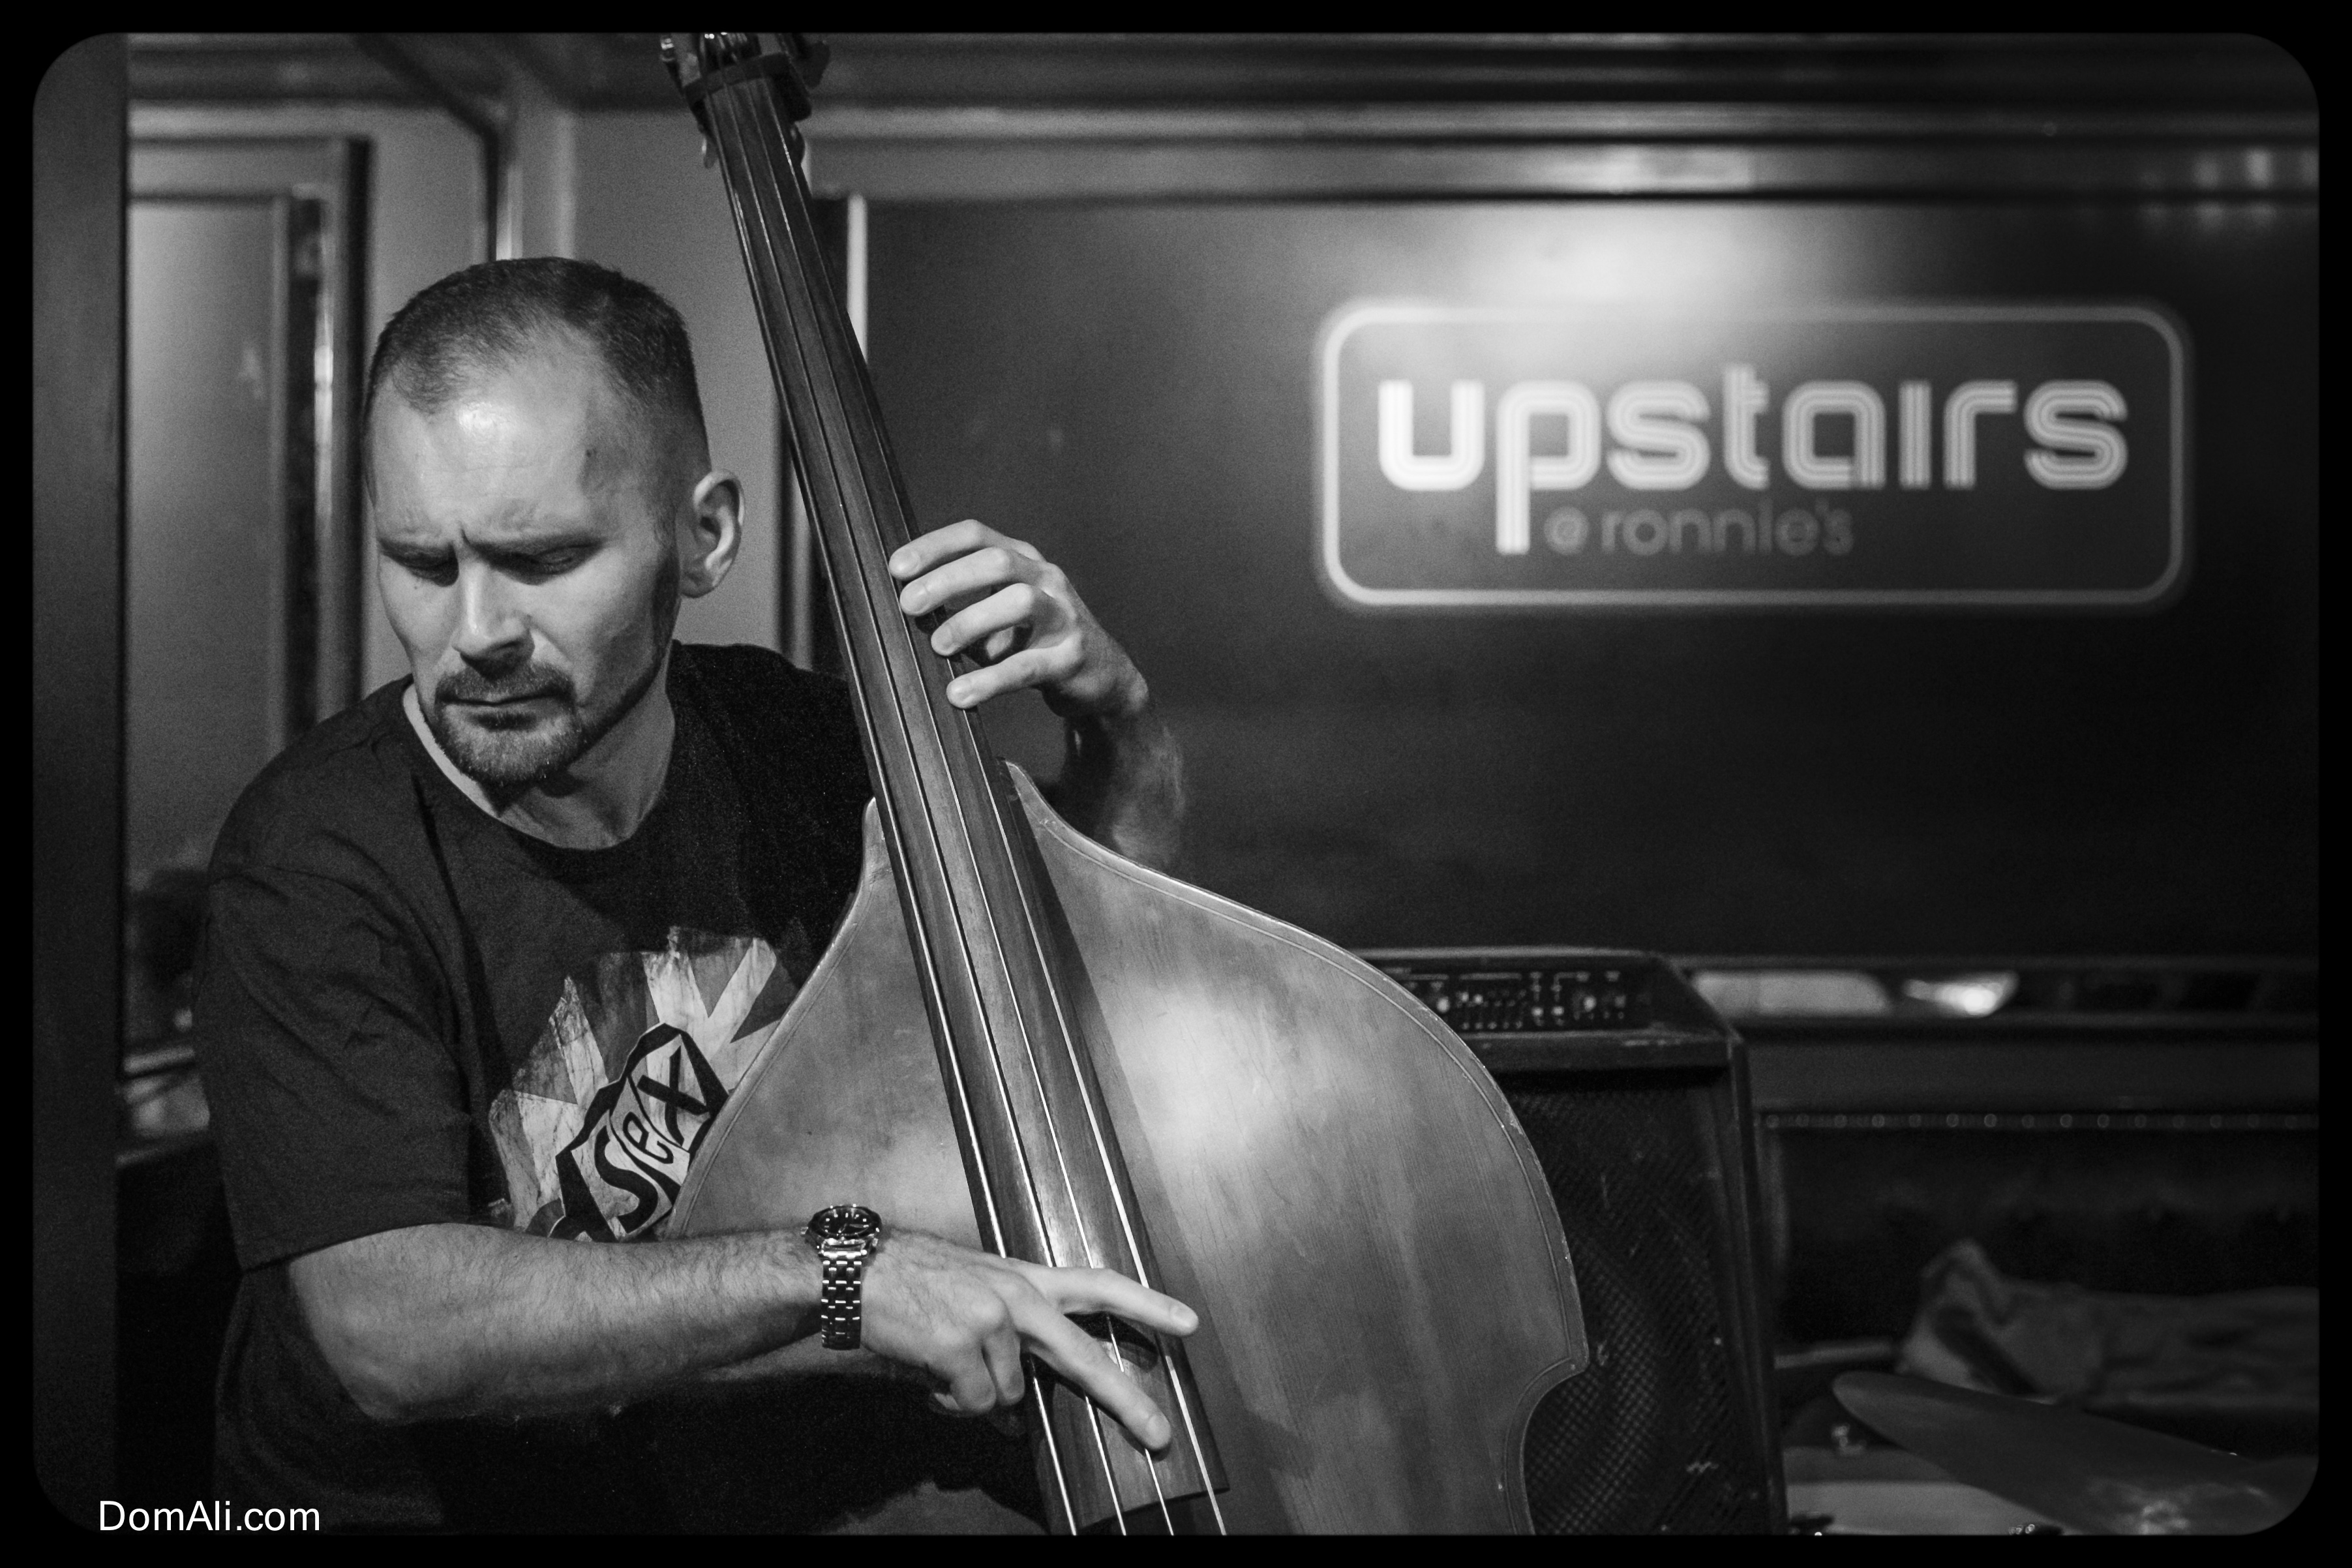 Double bass player at a jazz club called Upstairs at Ronnie's (London, England)